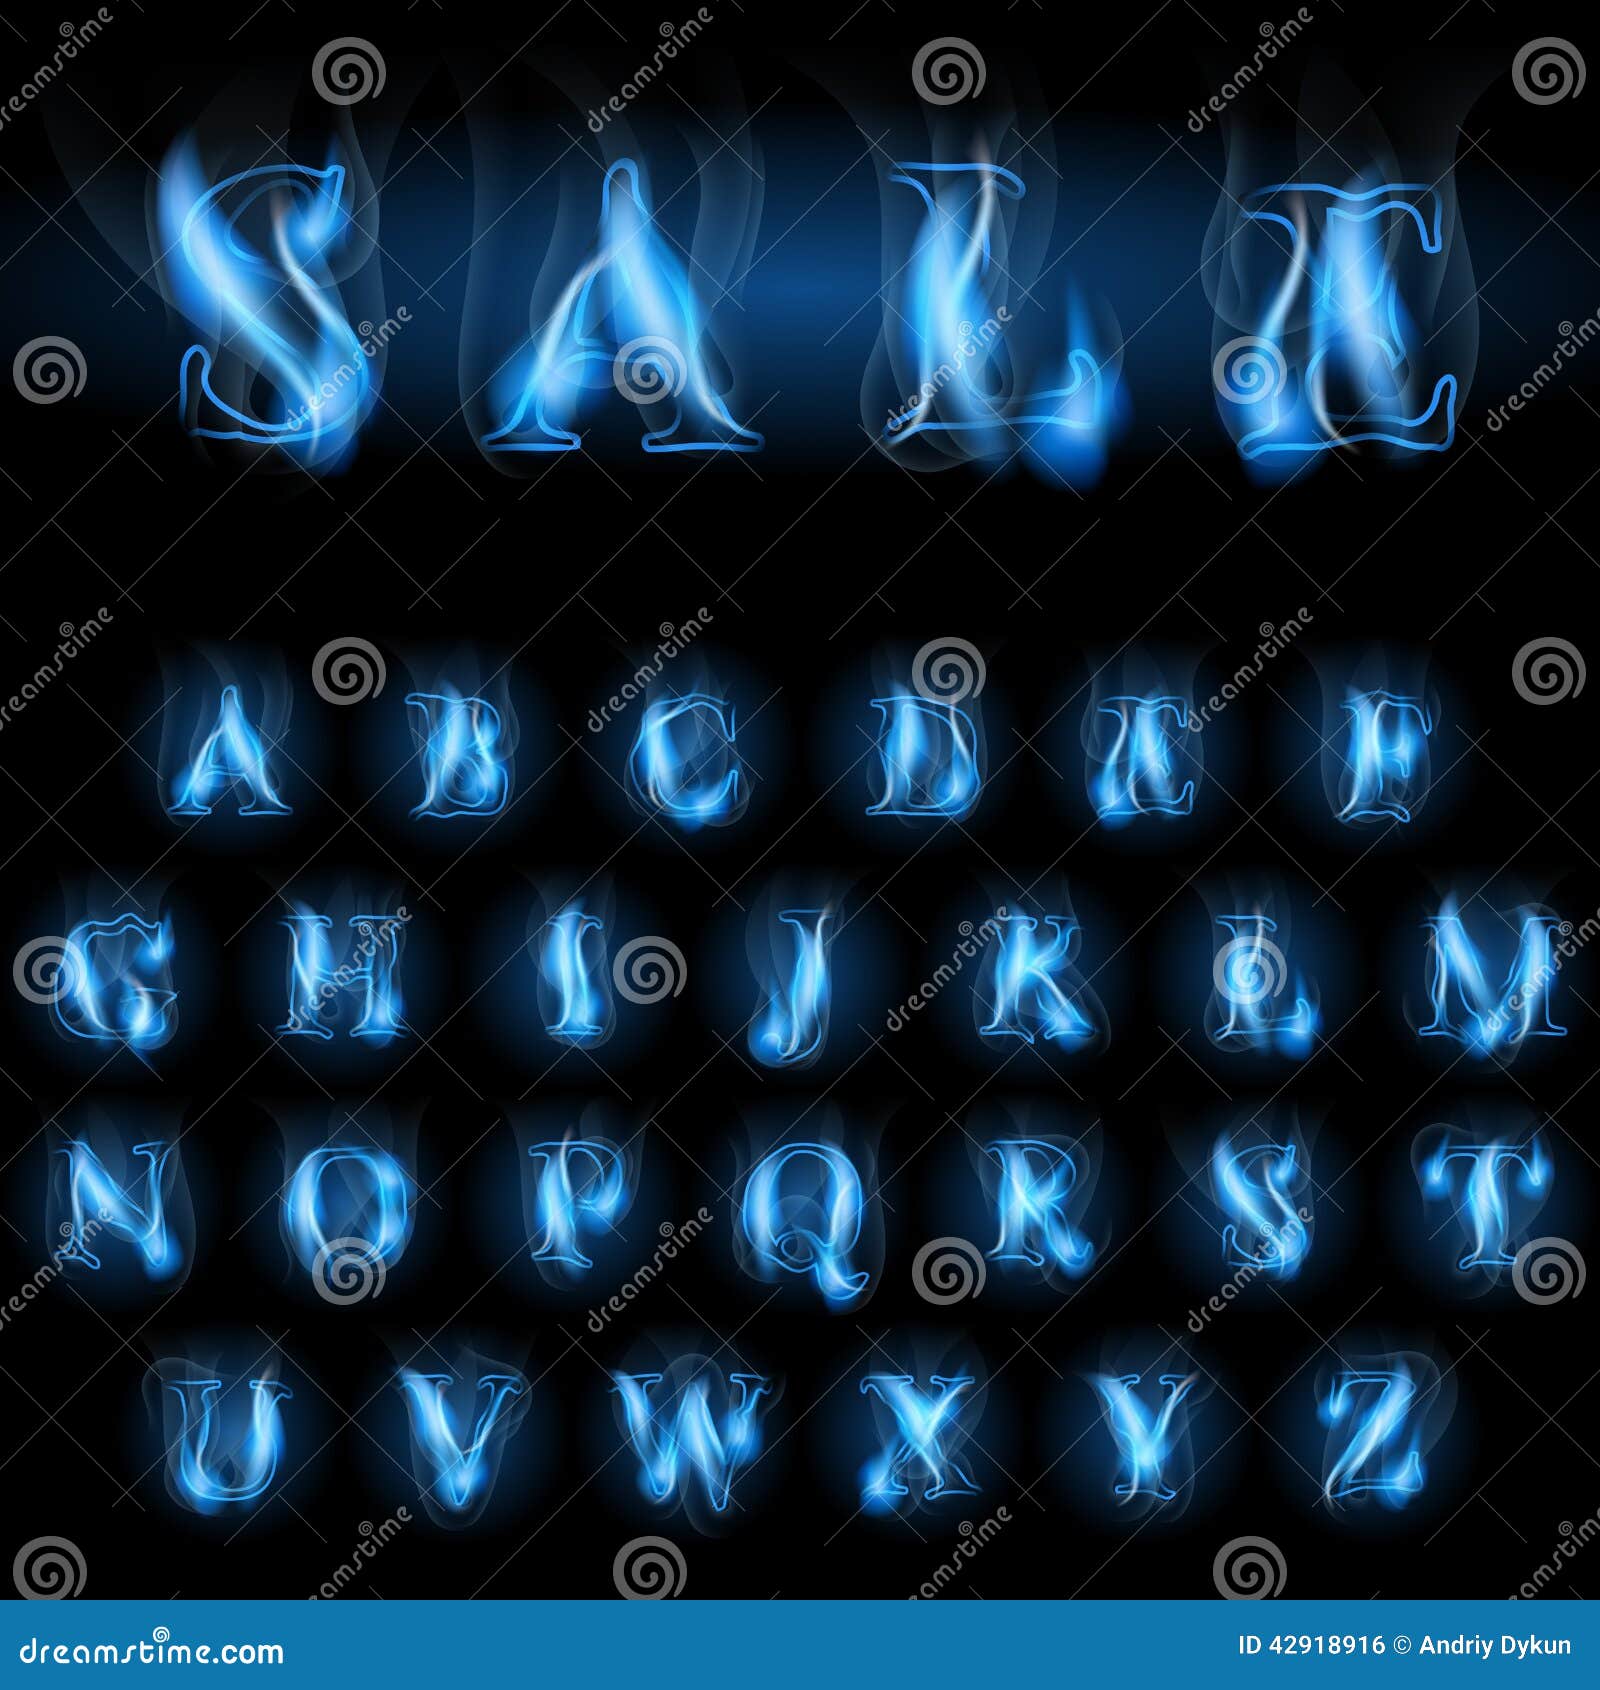 Blue Fire Letters Stock Illustrations 512 Blue Fire Letters Stock Illustrations Vectors Clipart Dreamstime